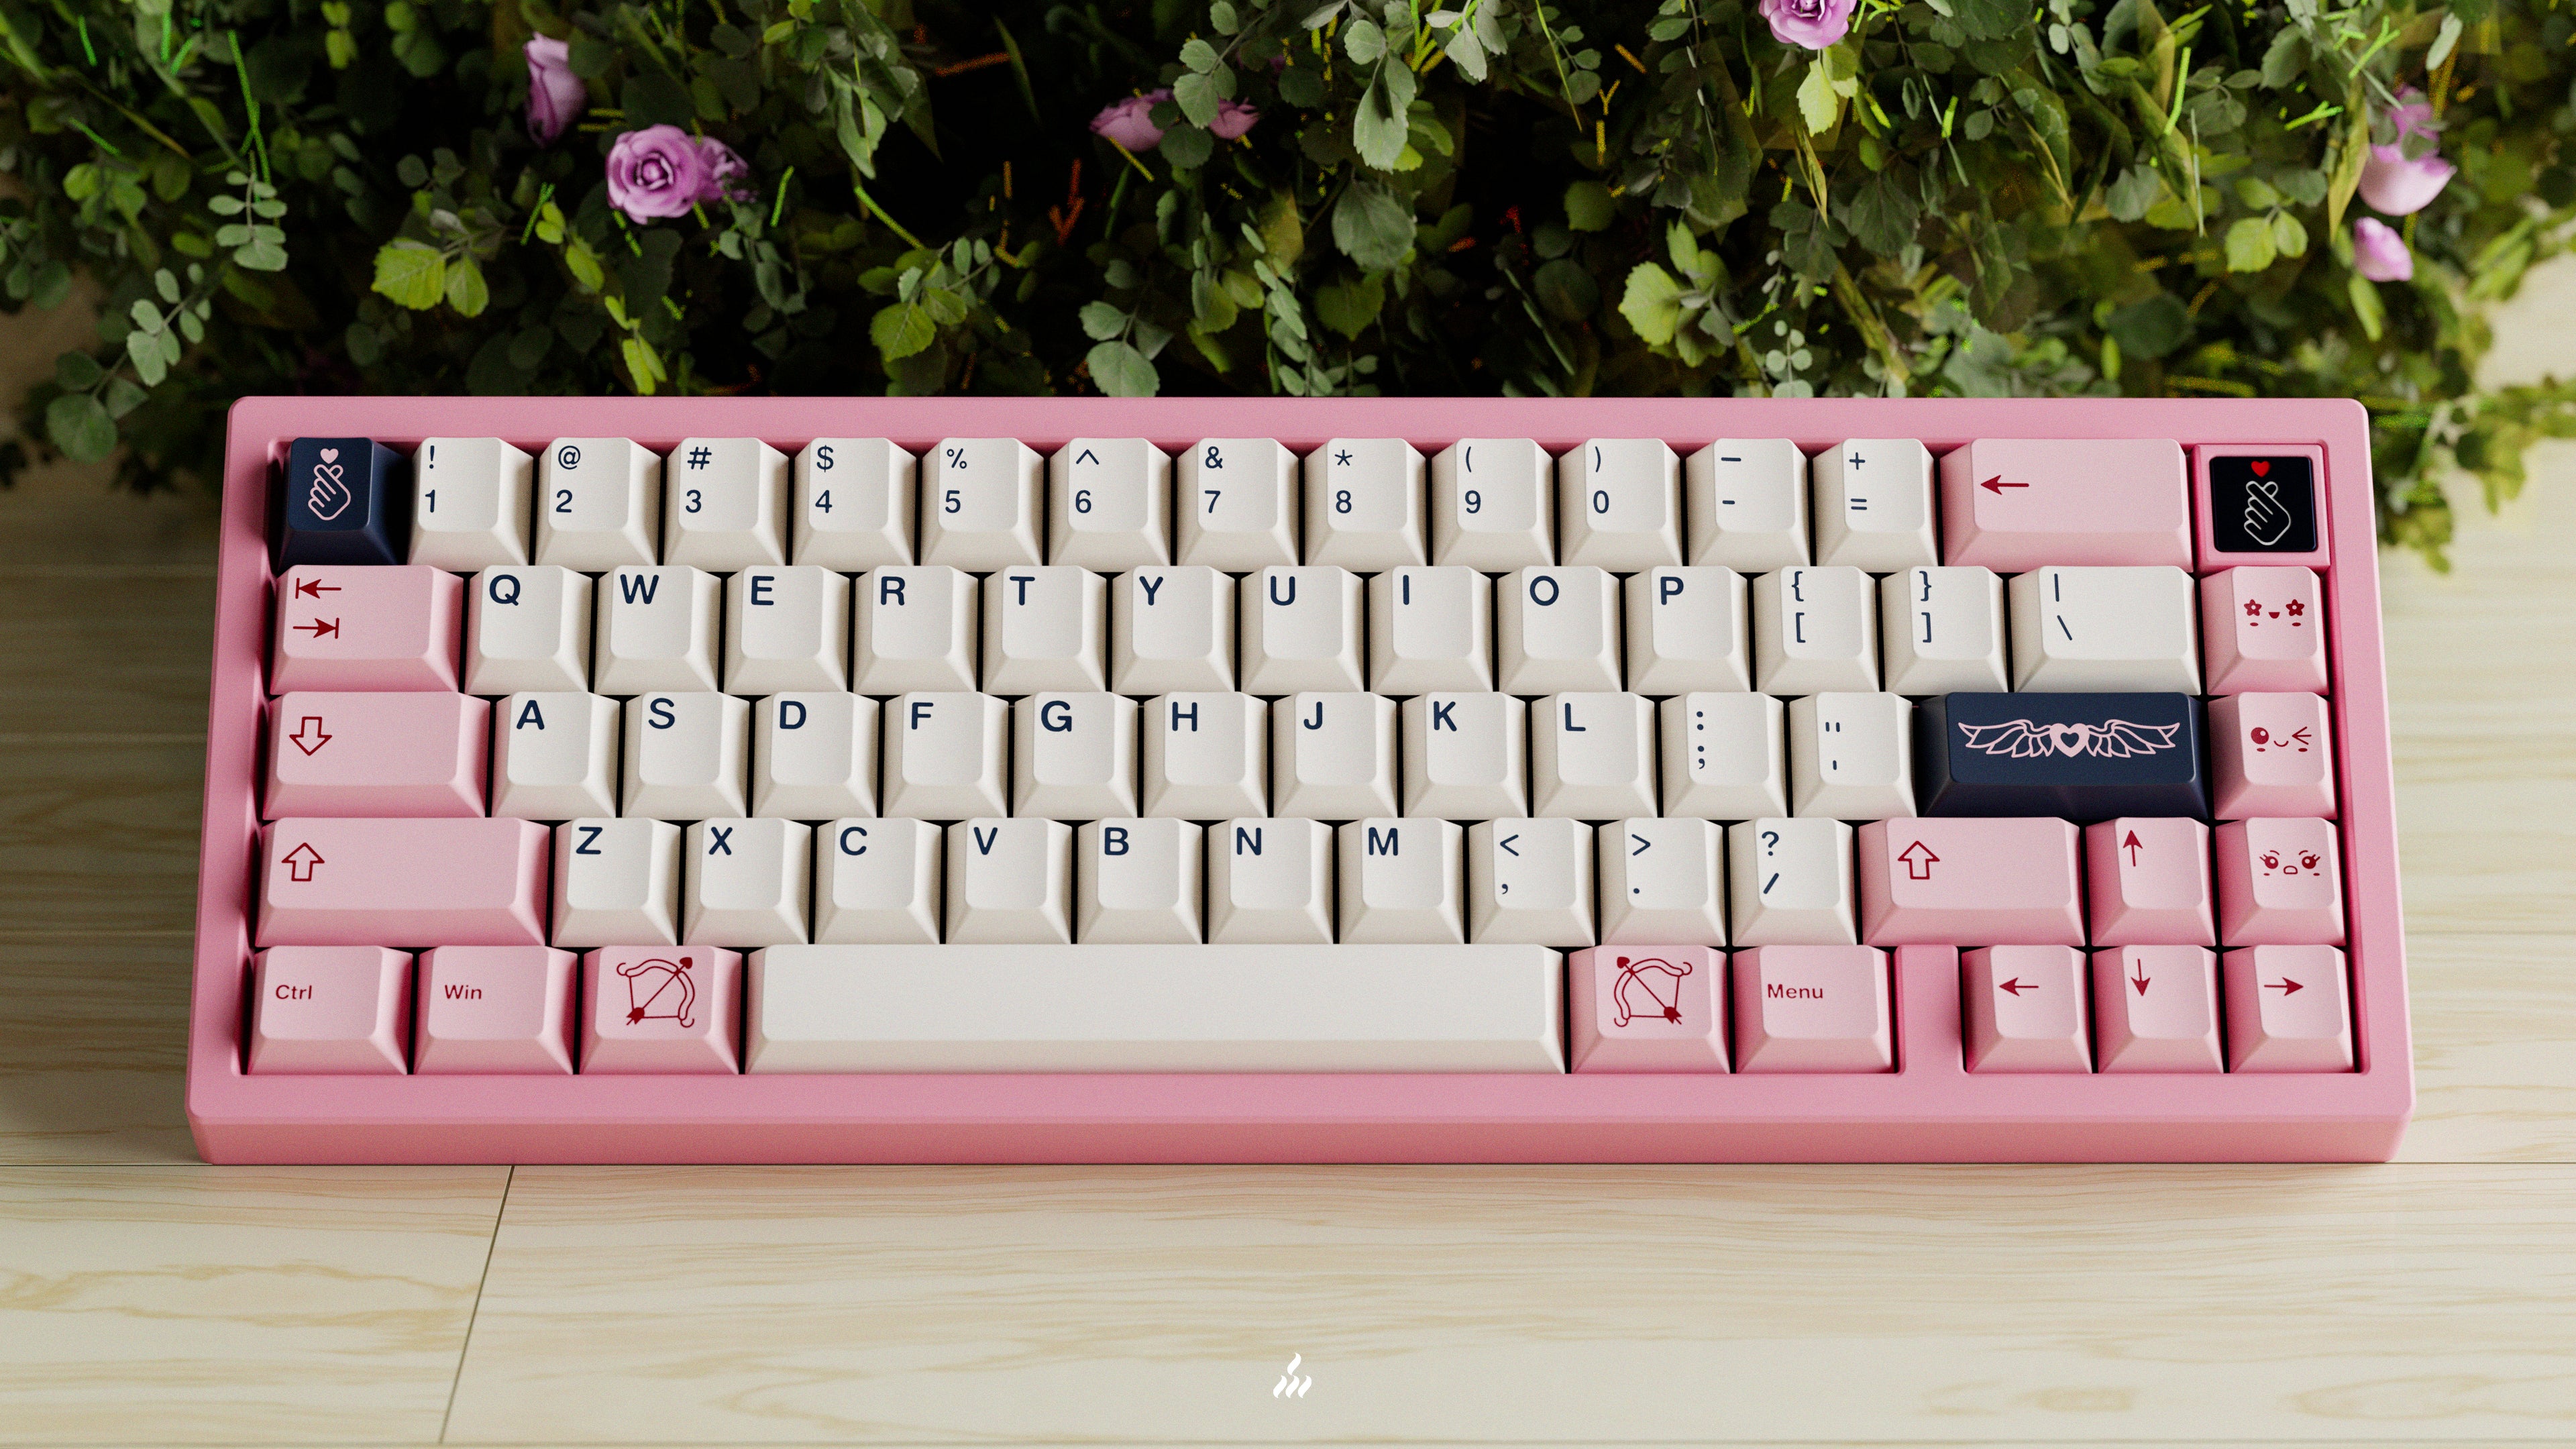 [Group-Buy] Zoom65 V3 X Cupid Collaboration Edition